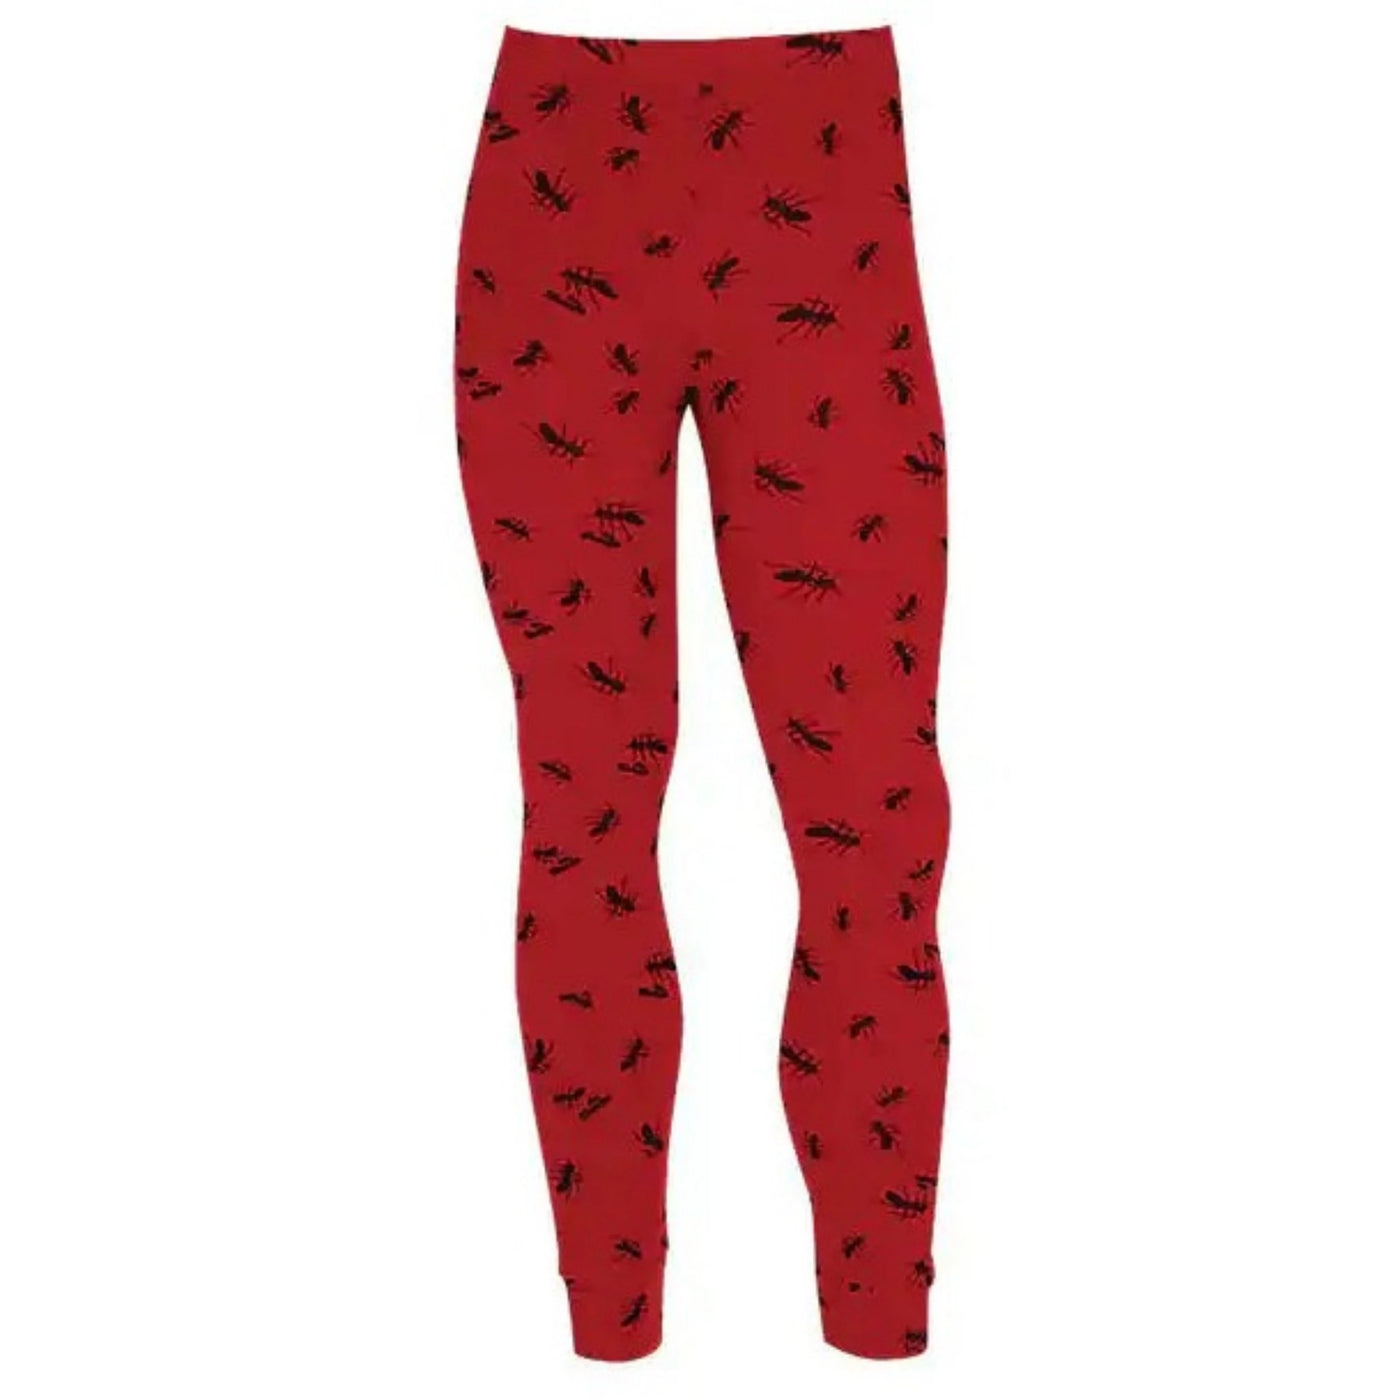 Sherpa Kids Thermal Pants - Red Ant